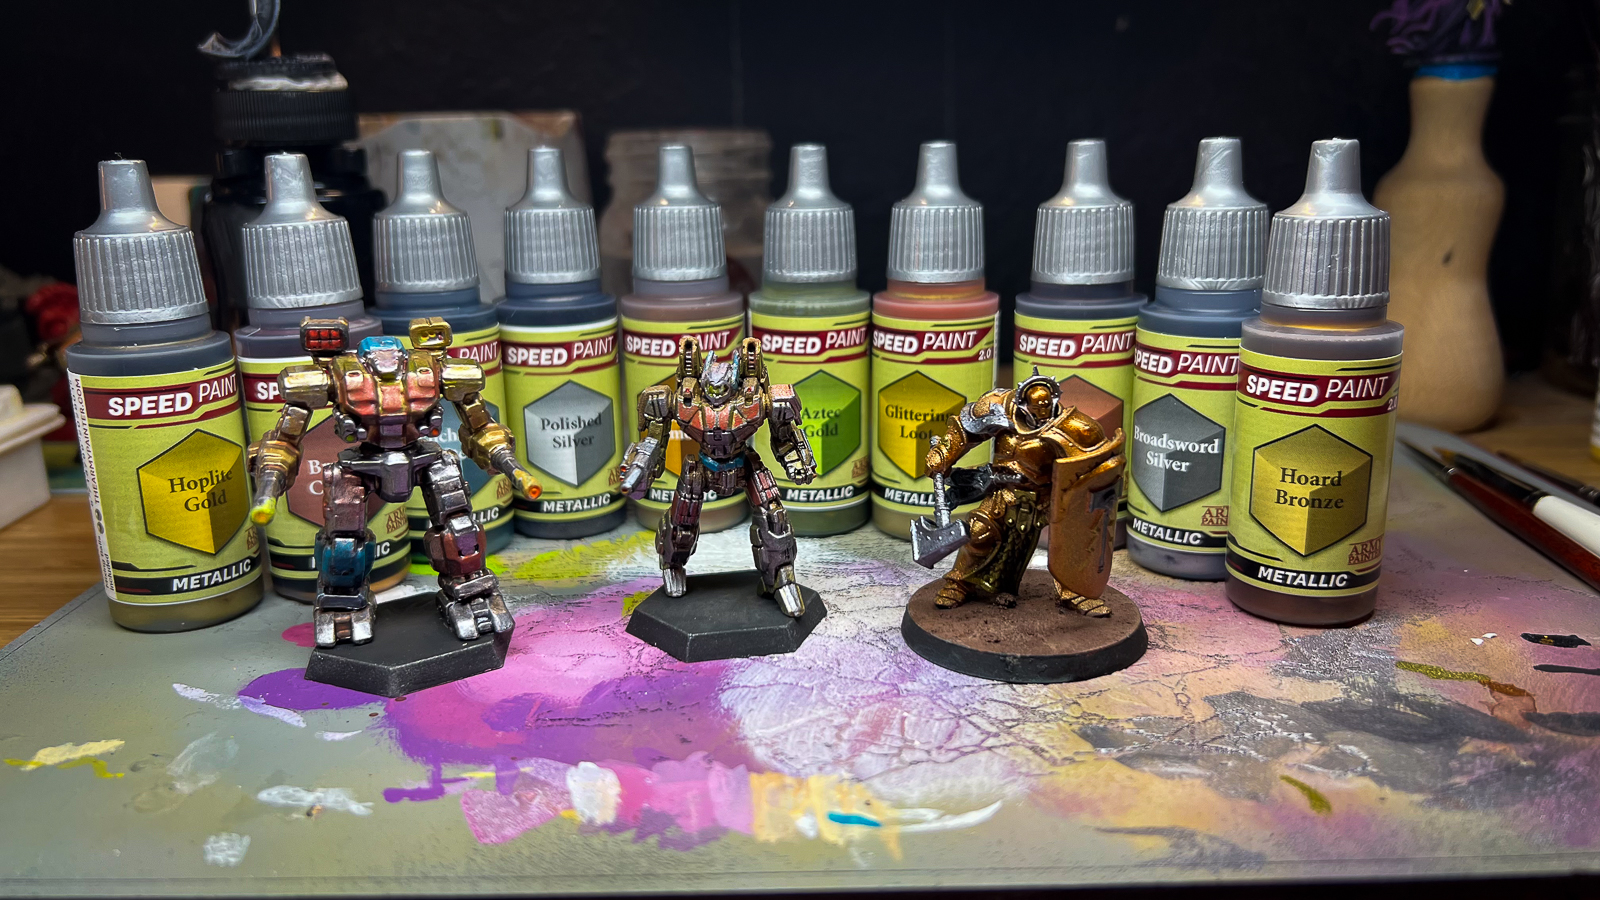 A set of finished models painted with metallic paints